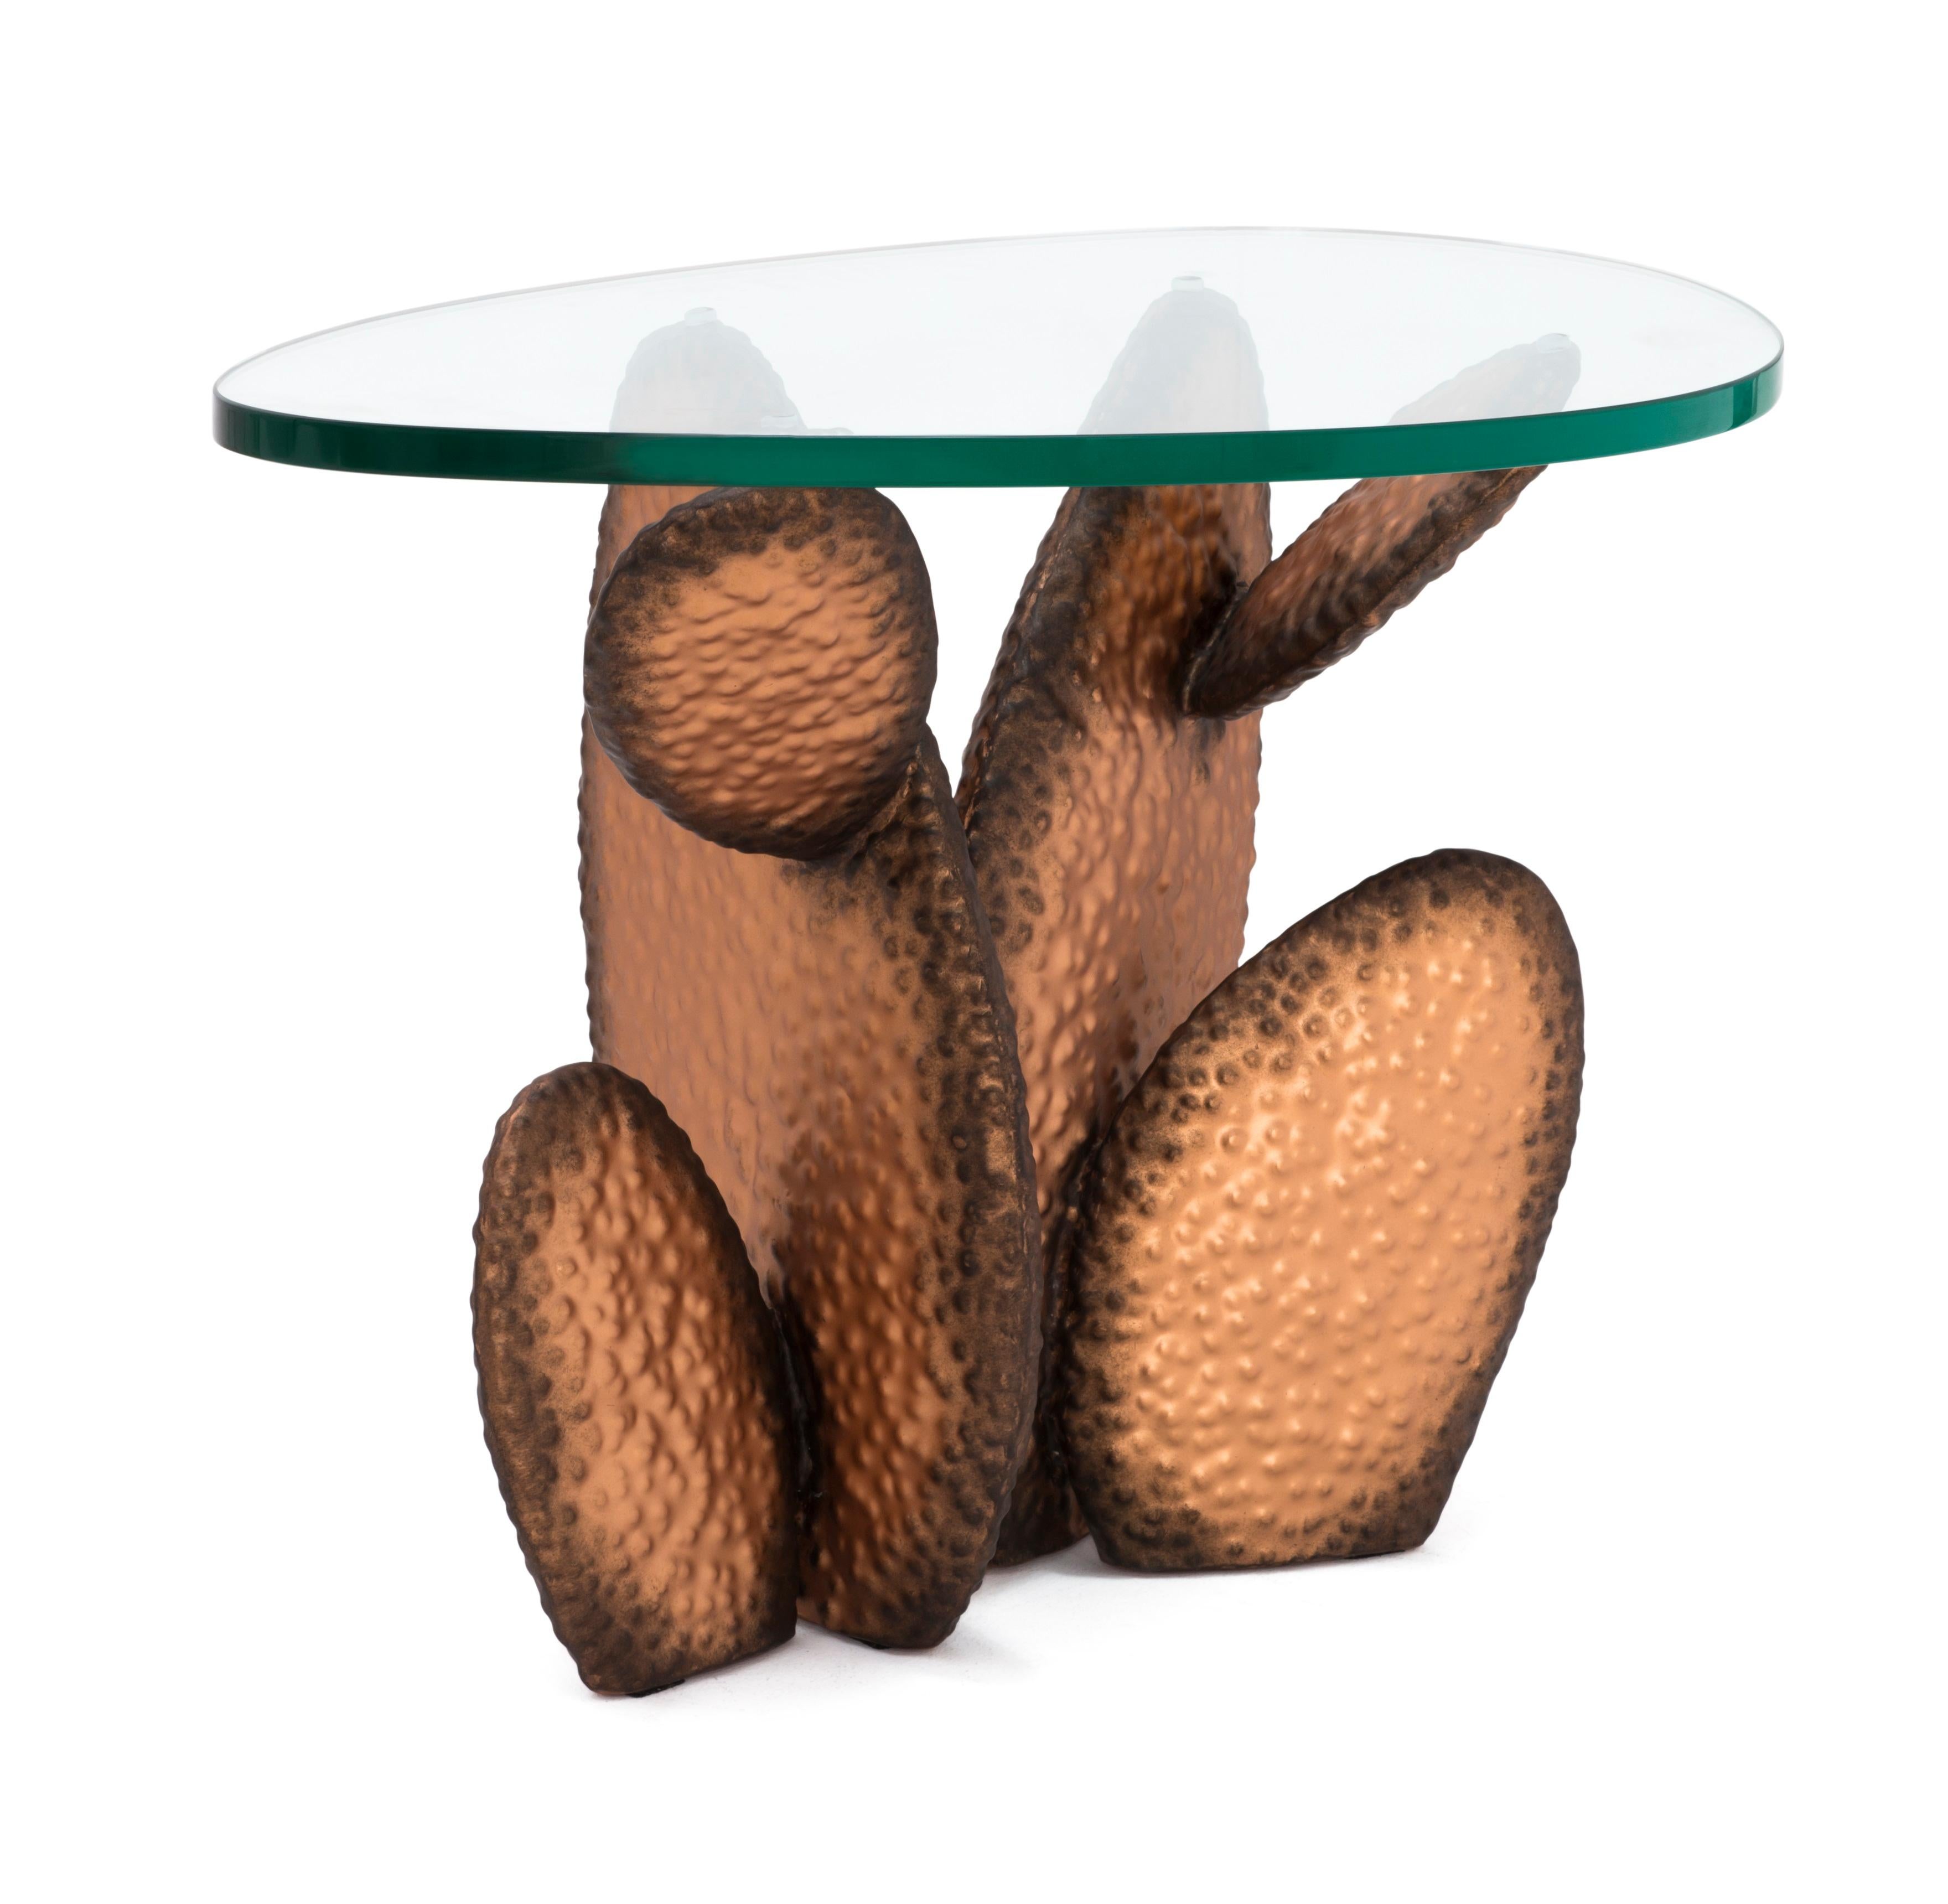 High gobi coffee table by Kenneth Cobonpue.
Materials: Steel. Glass. 
Also available in other sizes. 
Dimensions: 
Glass 45 cm x 66 cm x H 19mm. 
Base 35 cm x 53 cm x H 48 cm.

Inspired by the characteristic form of the cactus, Gobi is a